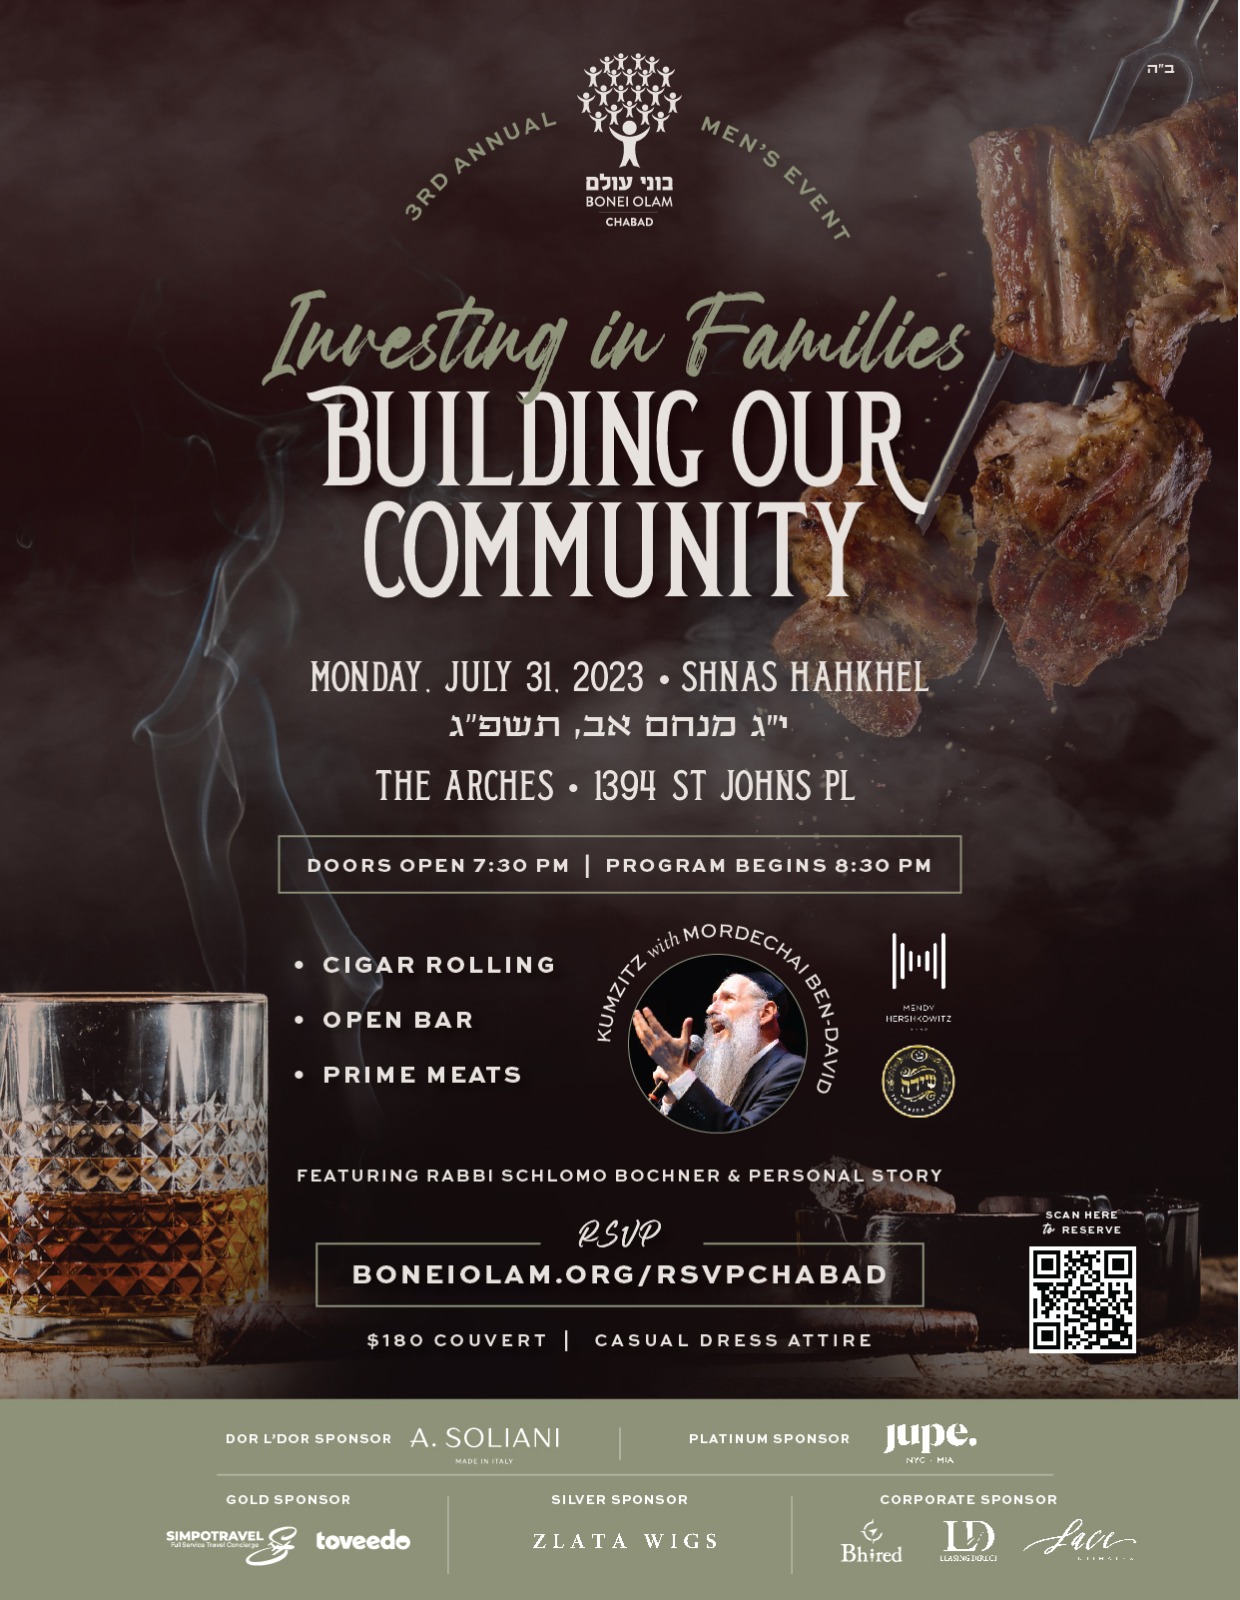 Chabad's 3rd Annual Men's Event